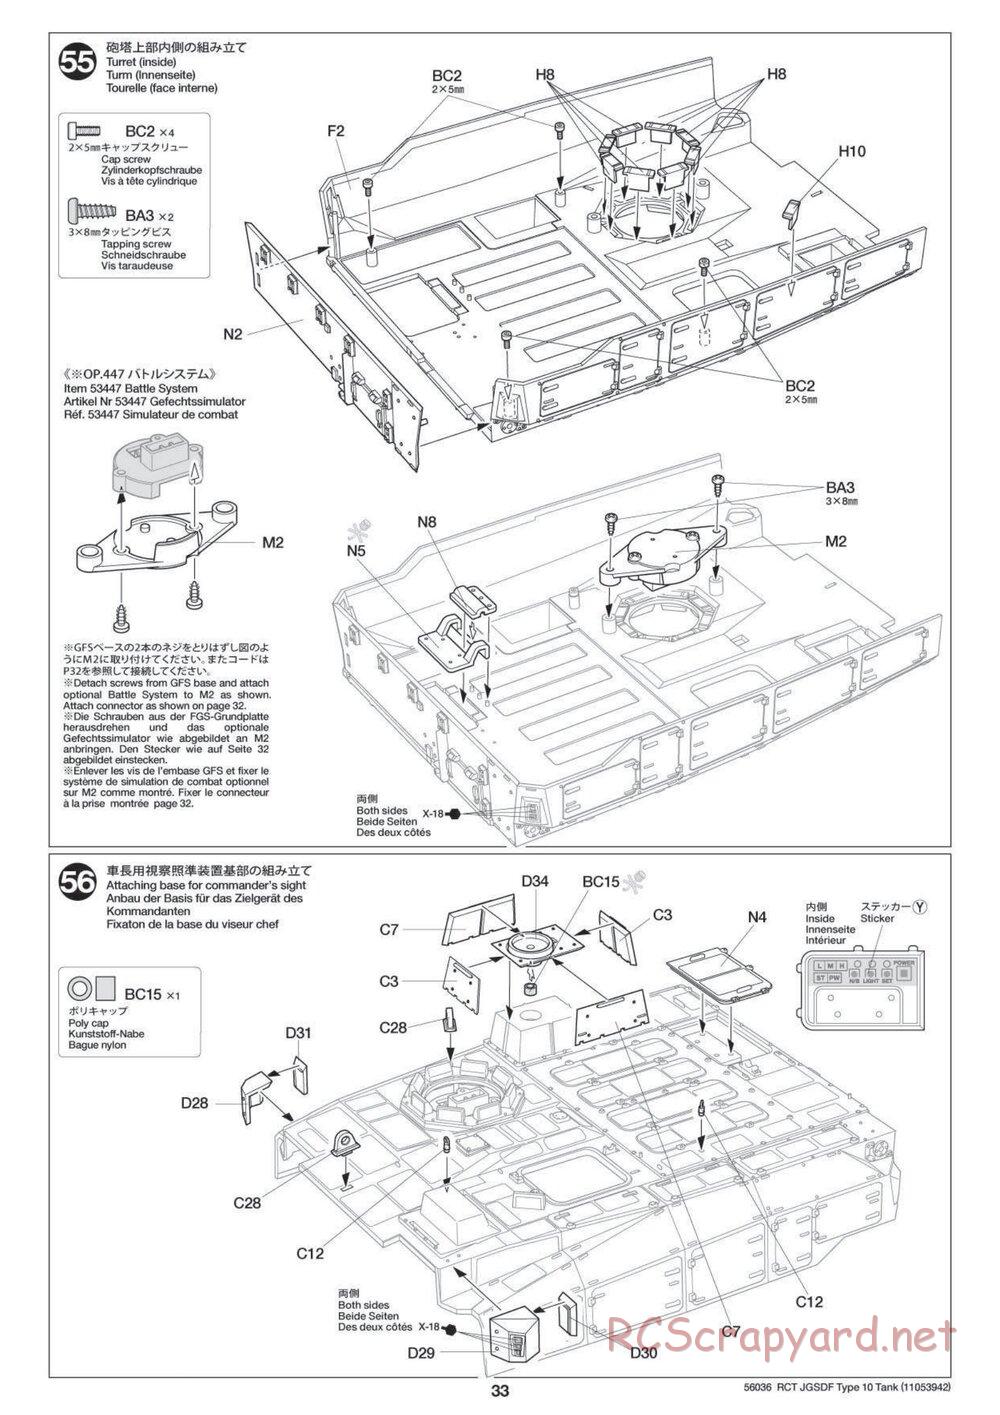 Tamiya - JGSDF Type 10 Tank - 1/16 Scale Chassis - Manual - Page 33